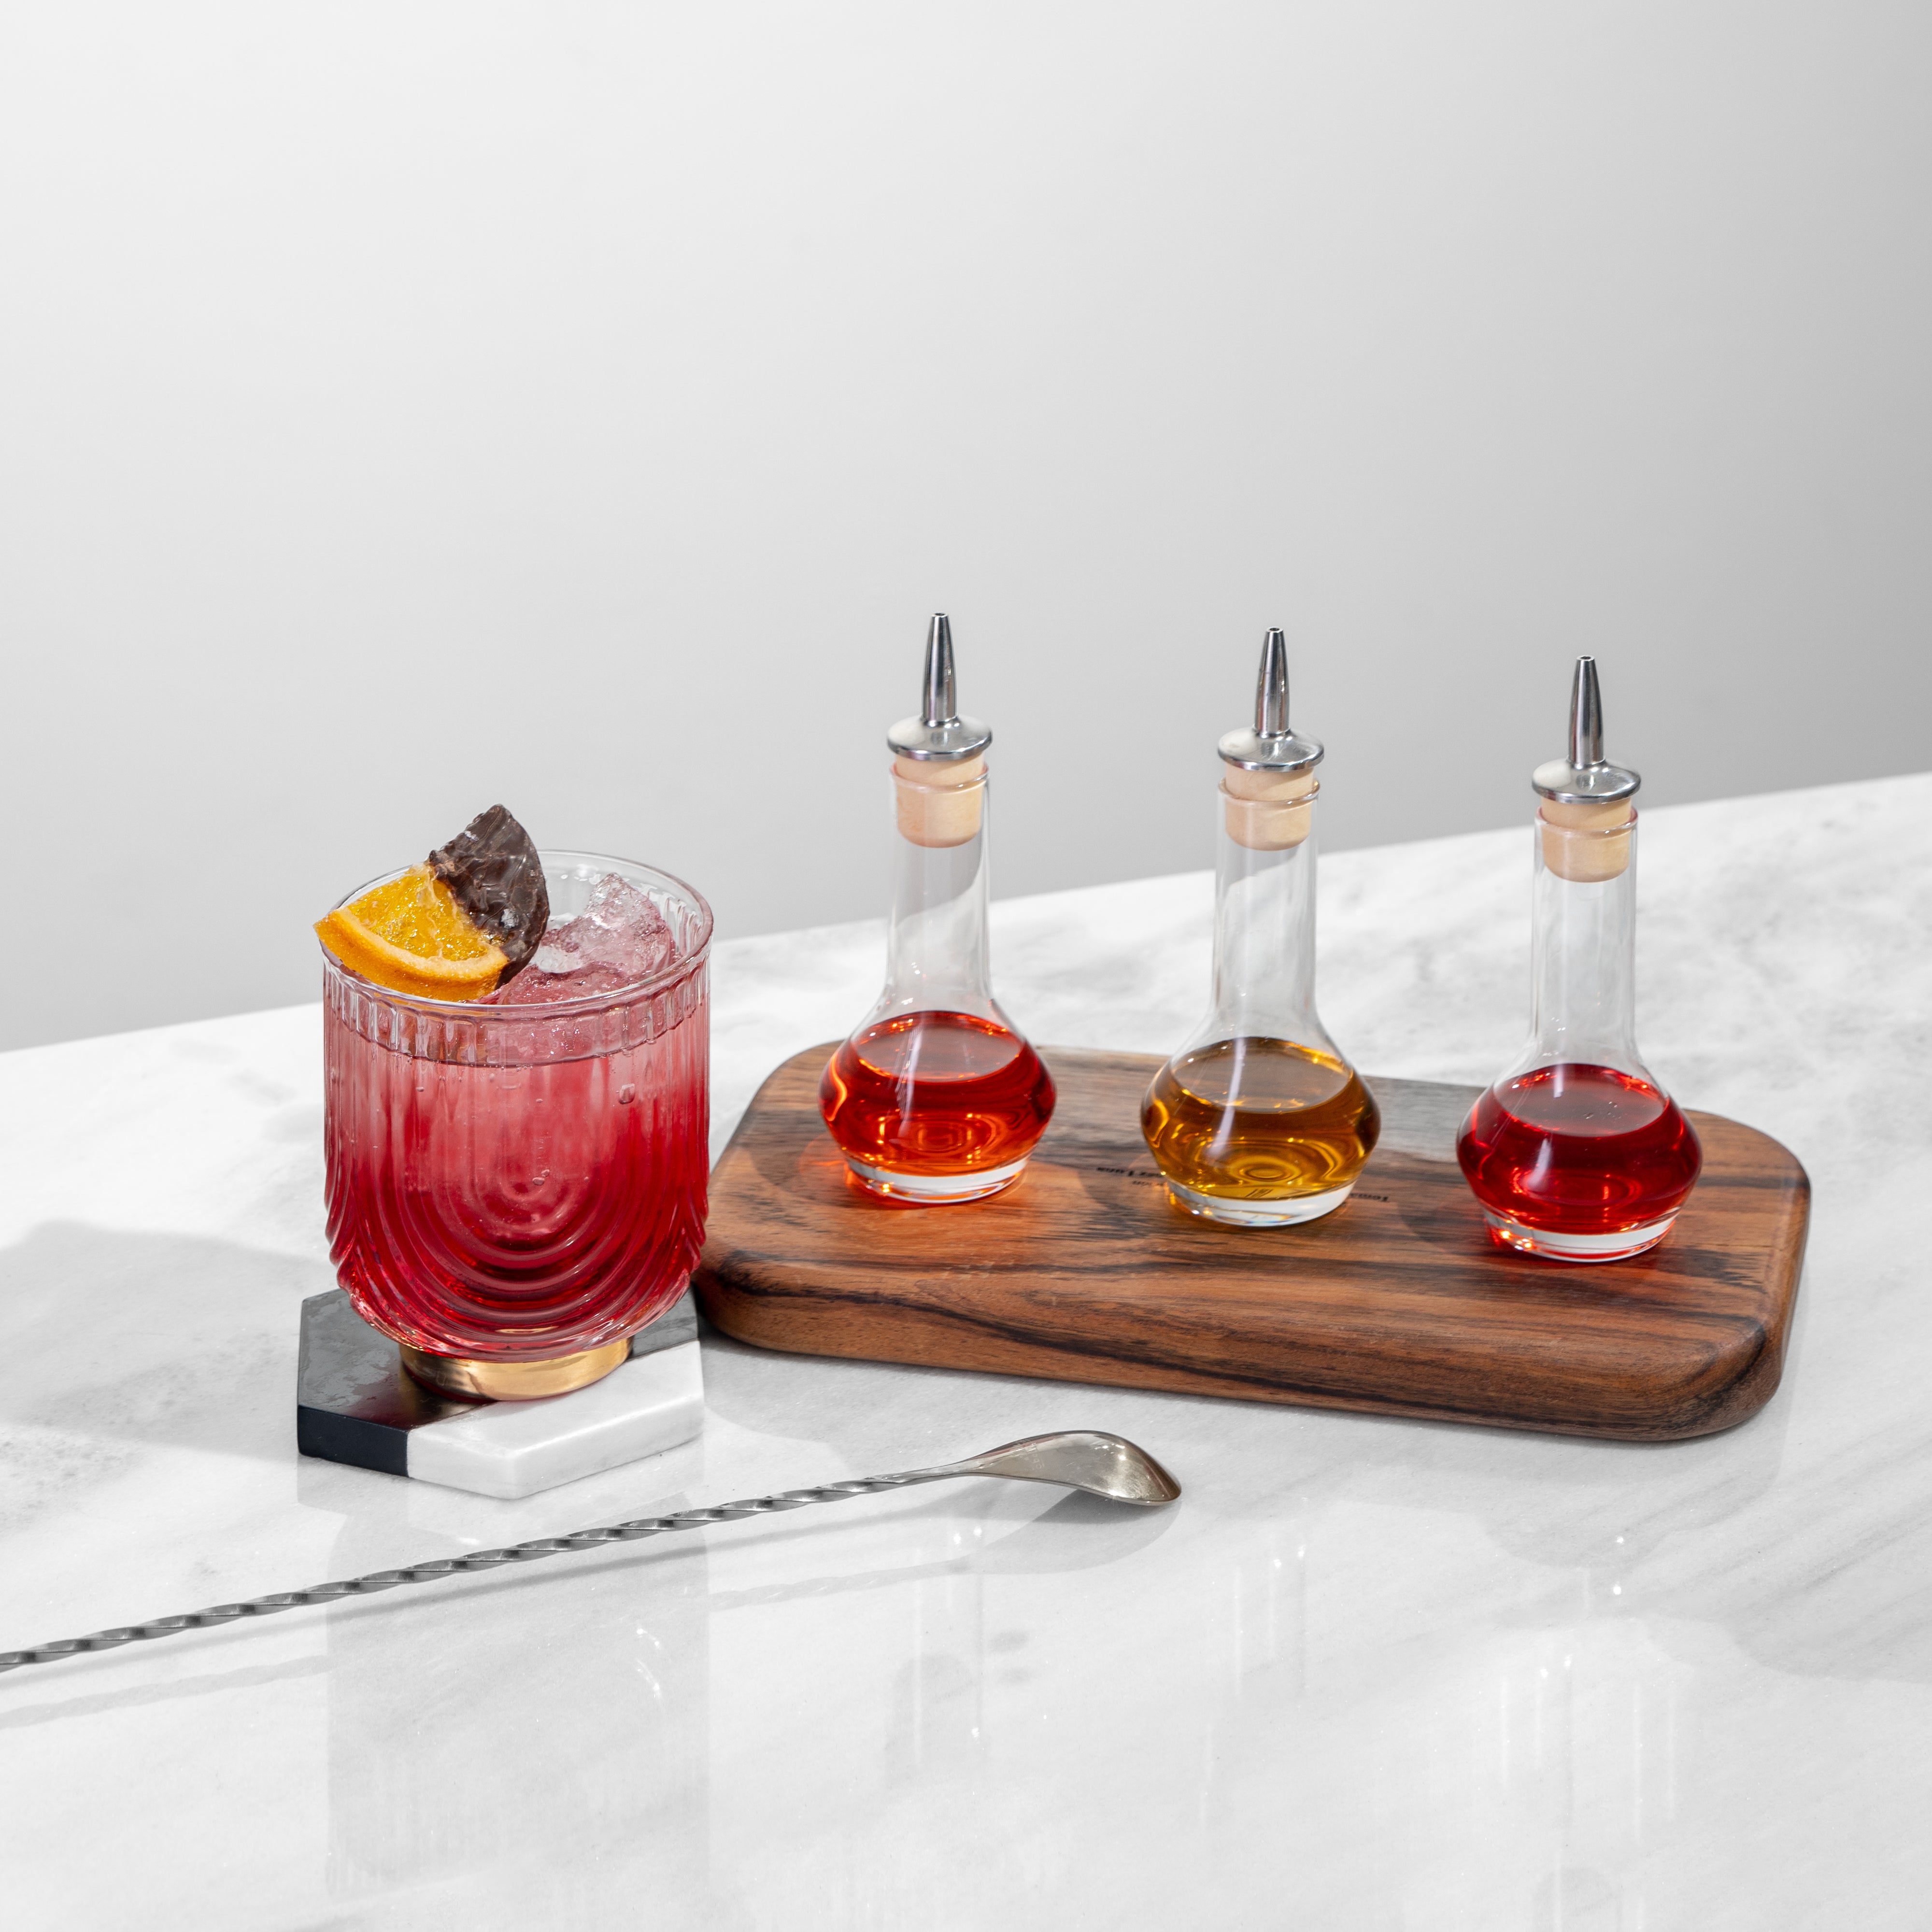 3 clear bitters bottles on a wood tray, each with red or amber liquid, next to a red cocktail with orange garnish & silver bar spoon